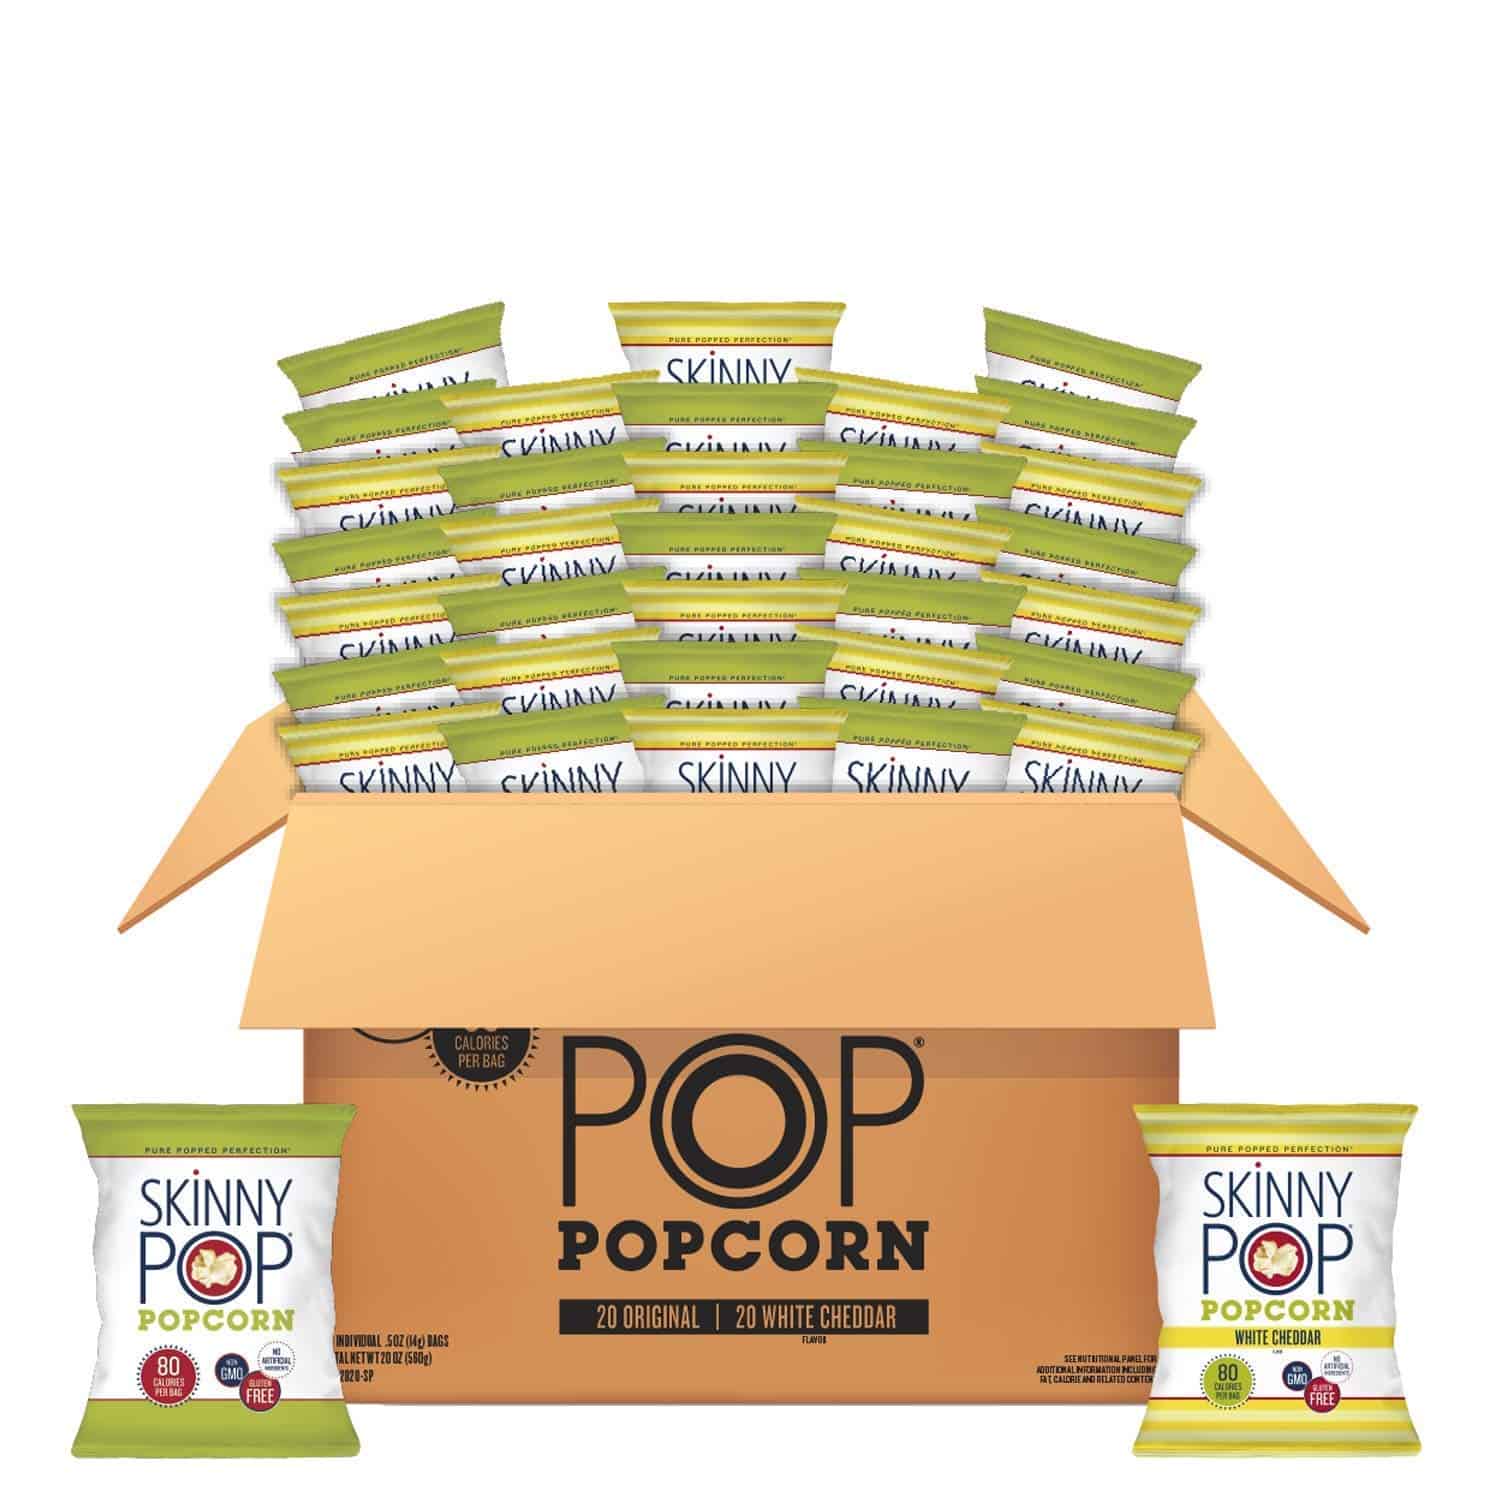 SkinnyPop Popcorn Variety, 0.5oz Individual Snack Size Bags (Pack of 40) ONLY $14.24 – Amazon Prime Deal